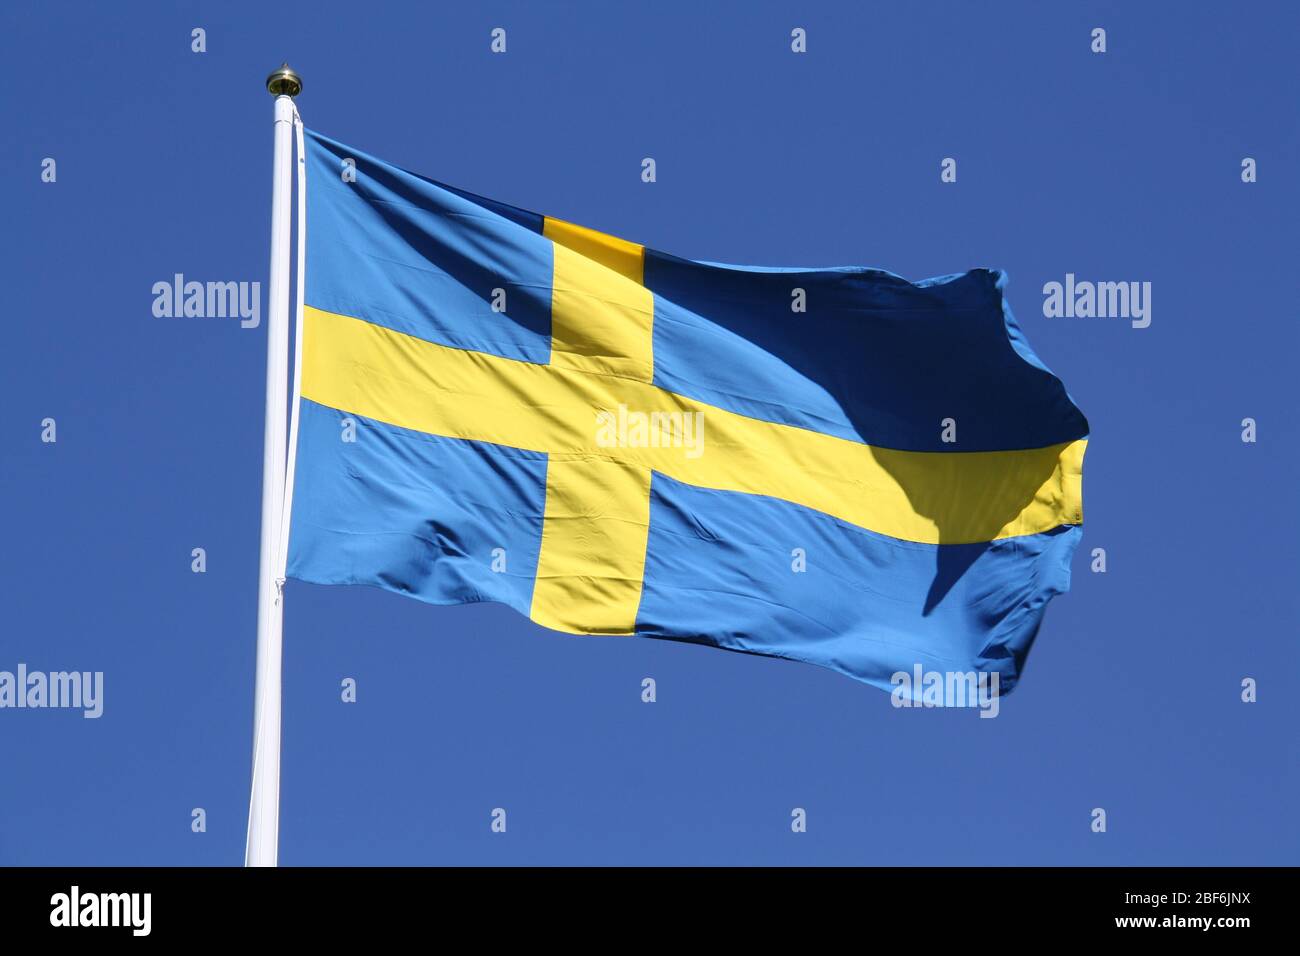 A beautiful picture of a Swedish flag. Stock Photo